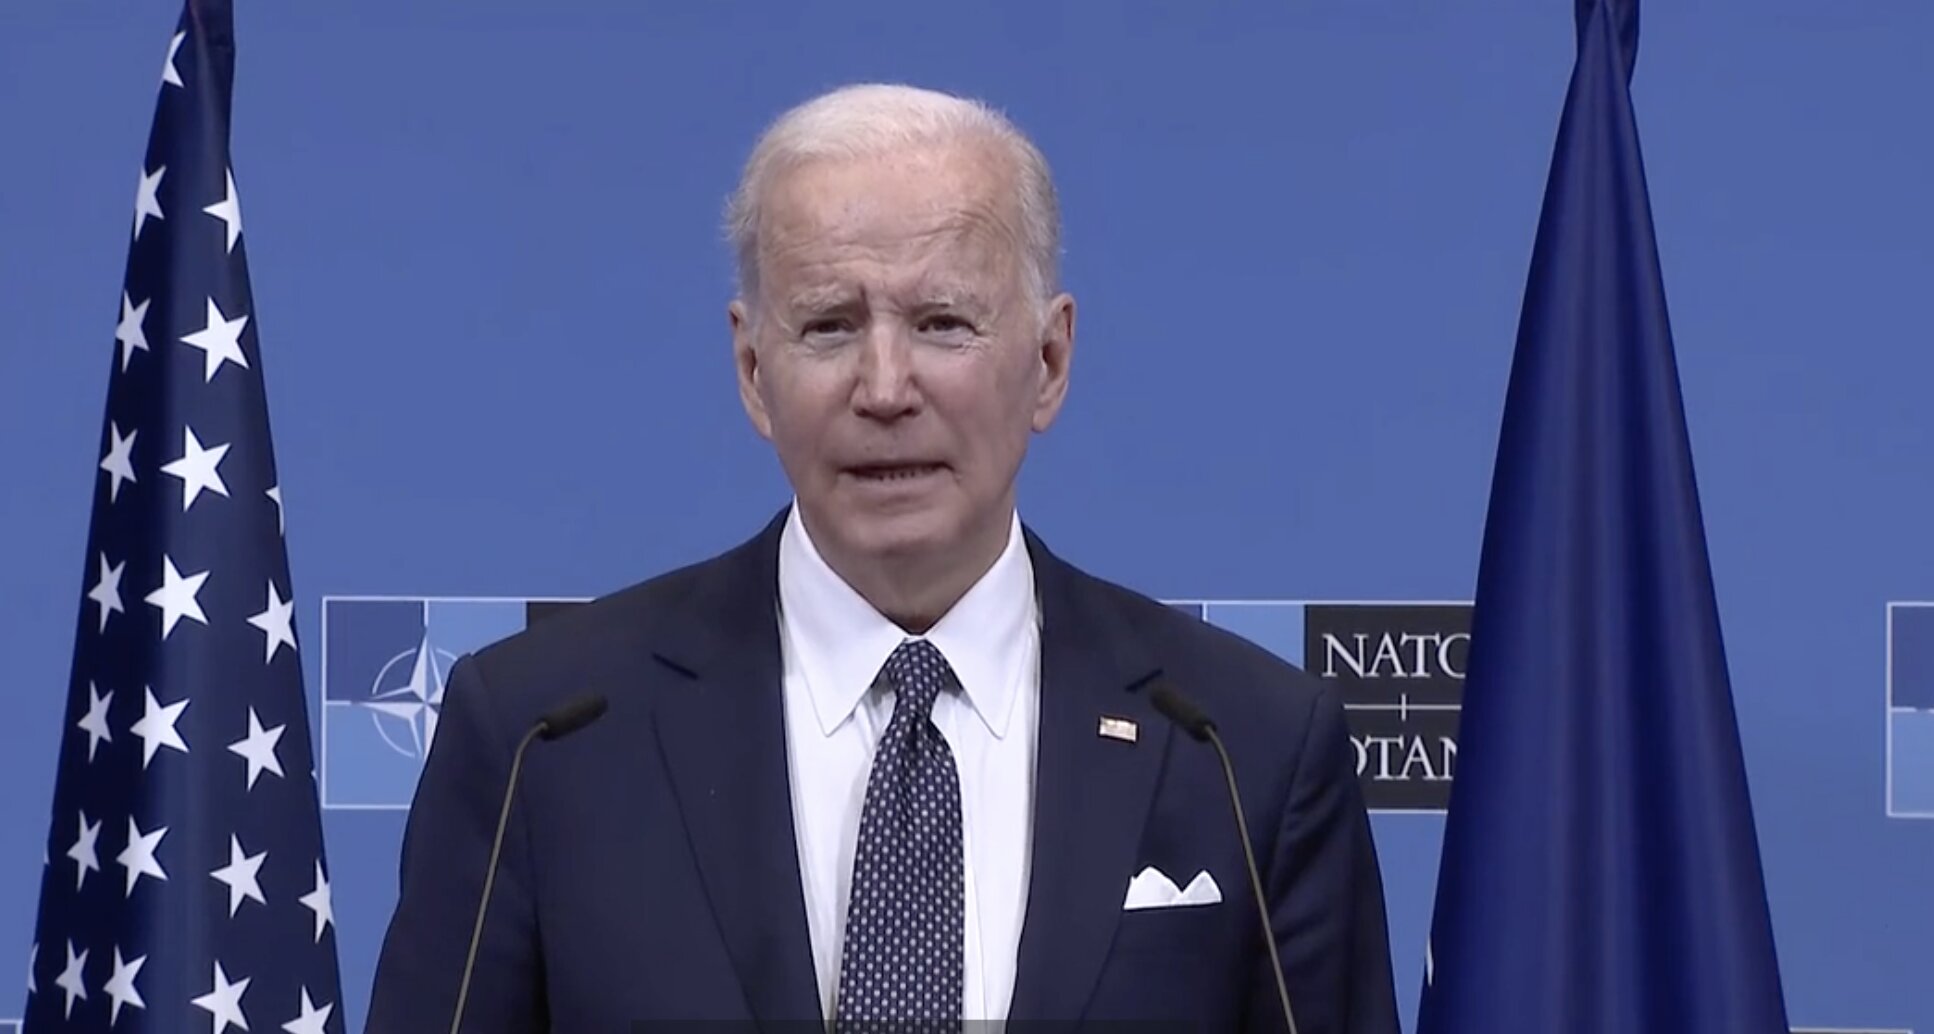 President Joe Biden holds a press briefing at NATO headquarters. US to accept THOUSANDS and THOUSANDS of Ukrainian refugees